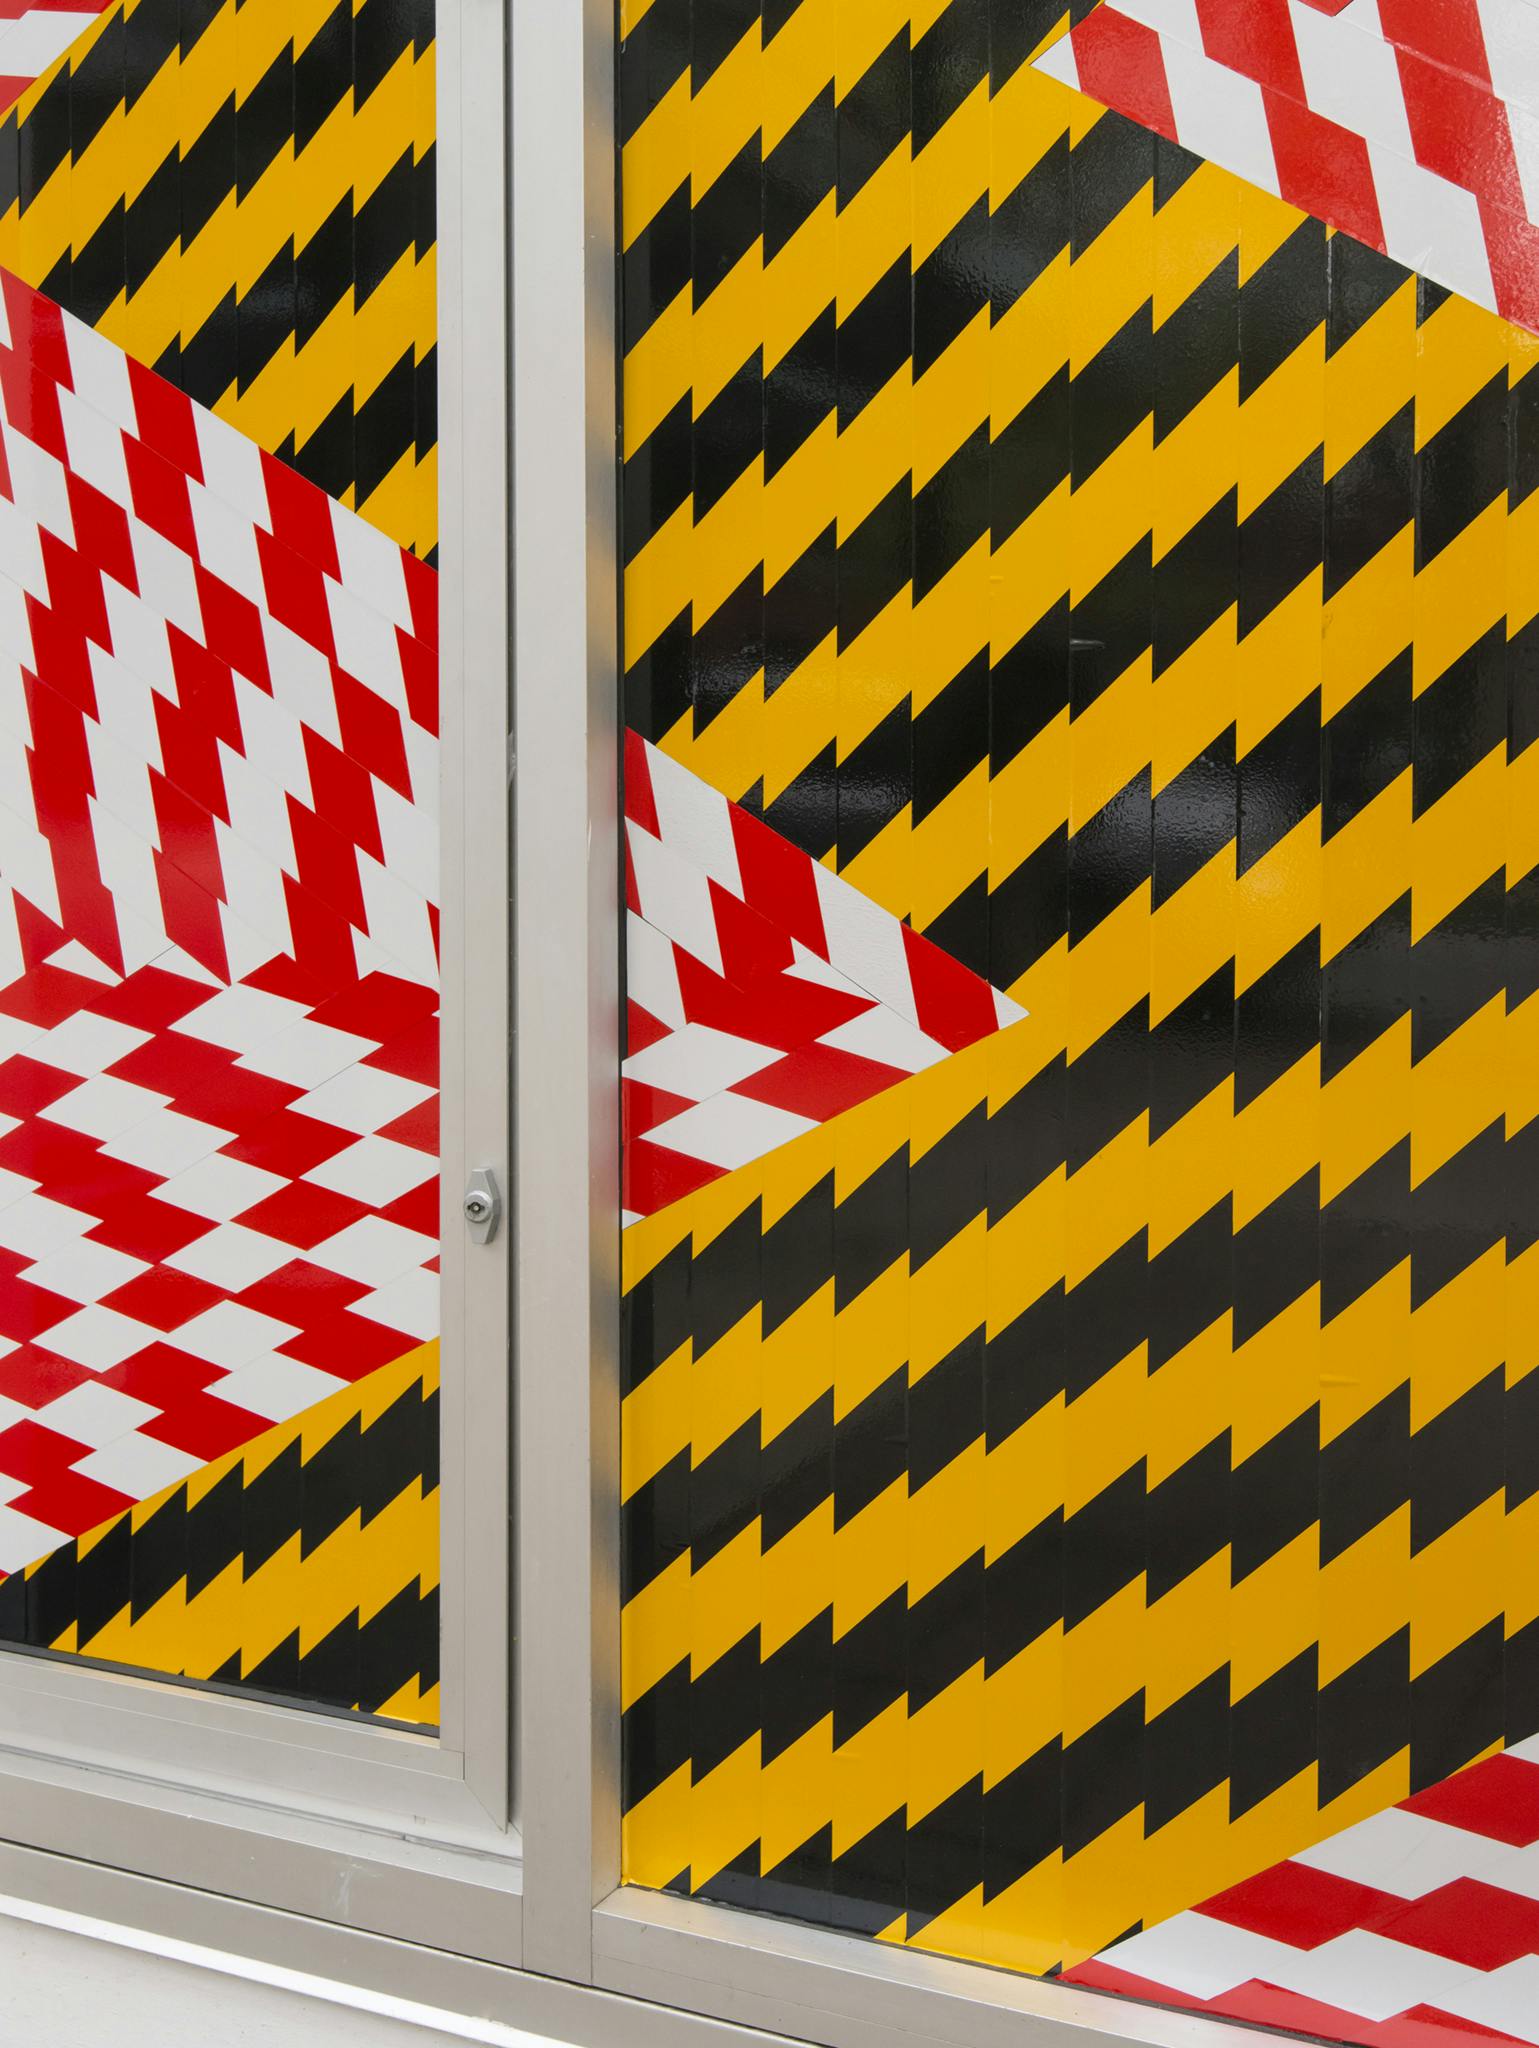 An image detail of red-and-white and black-and-yellow caution tape installed across CAG’s ground floor façade windows. The caution tape forms zig-zag lines and shapes. 